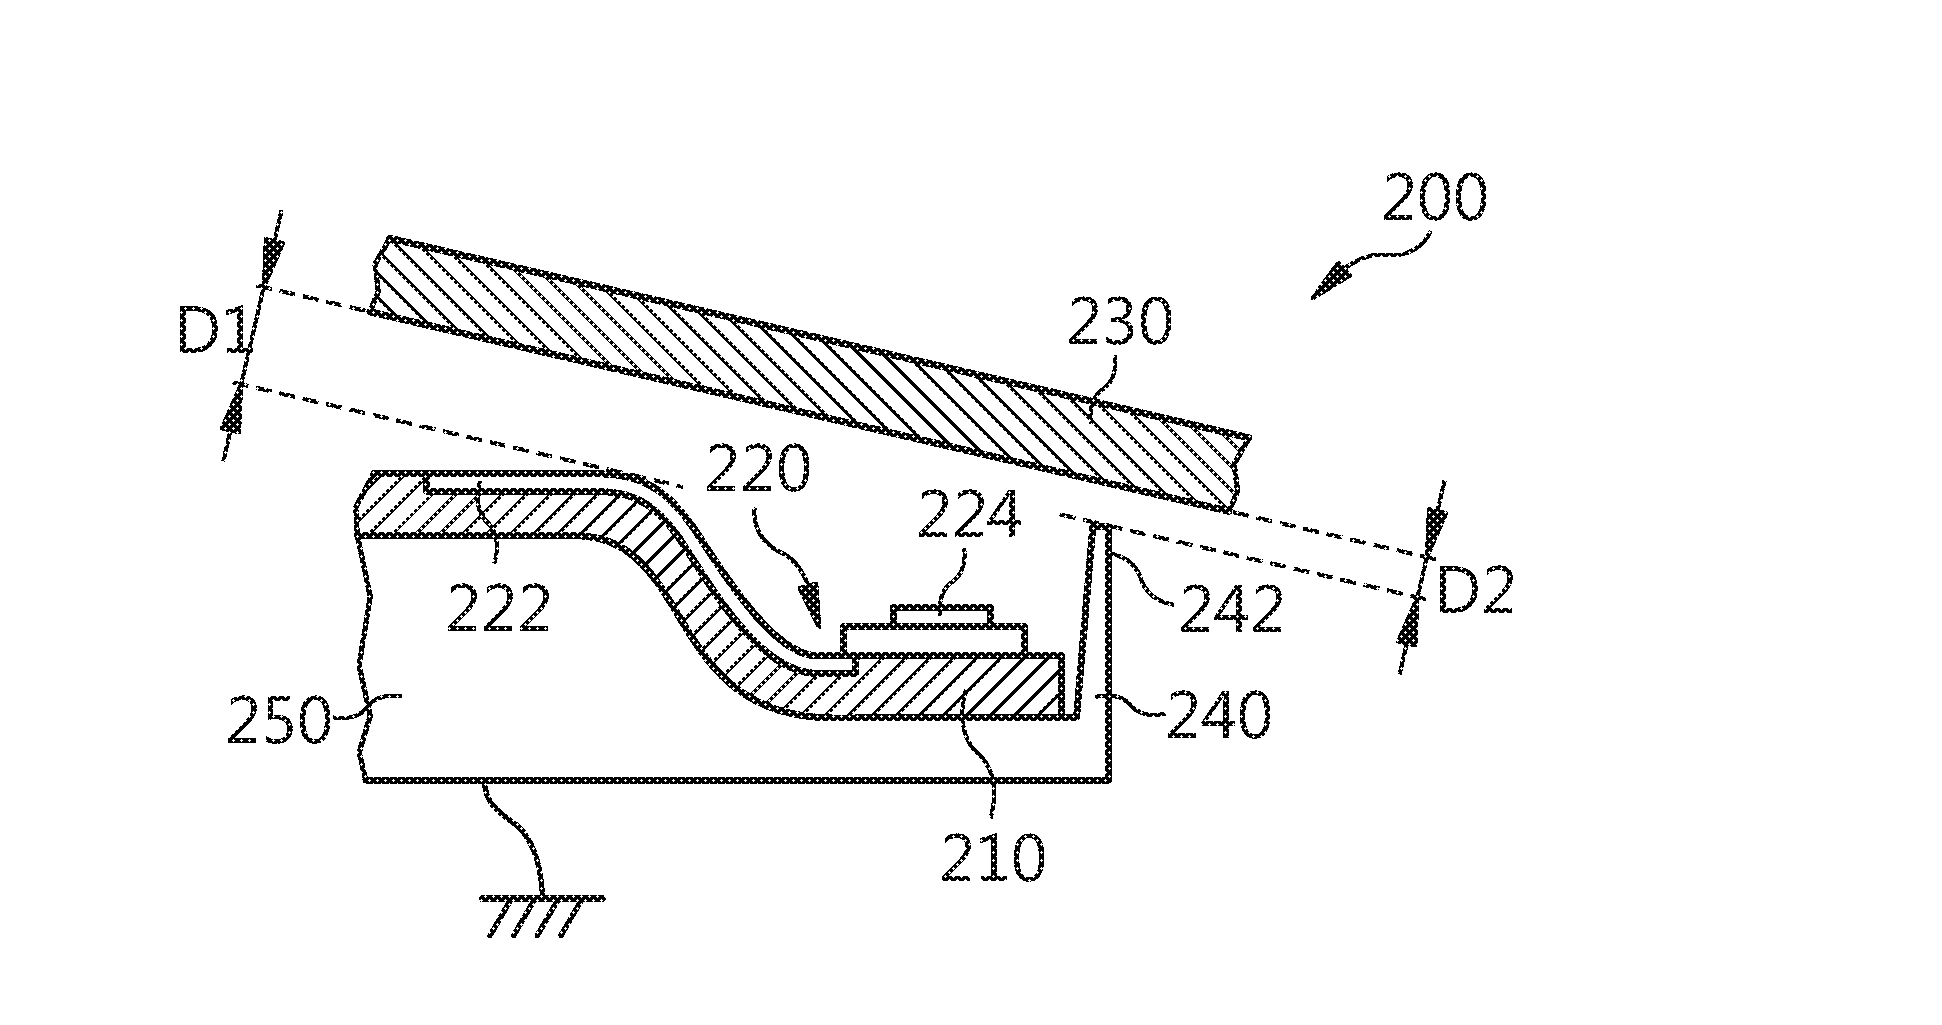 Lighting device for a motor vehicle, incorporating means for protection against electrostatic discharges